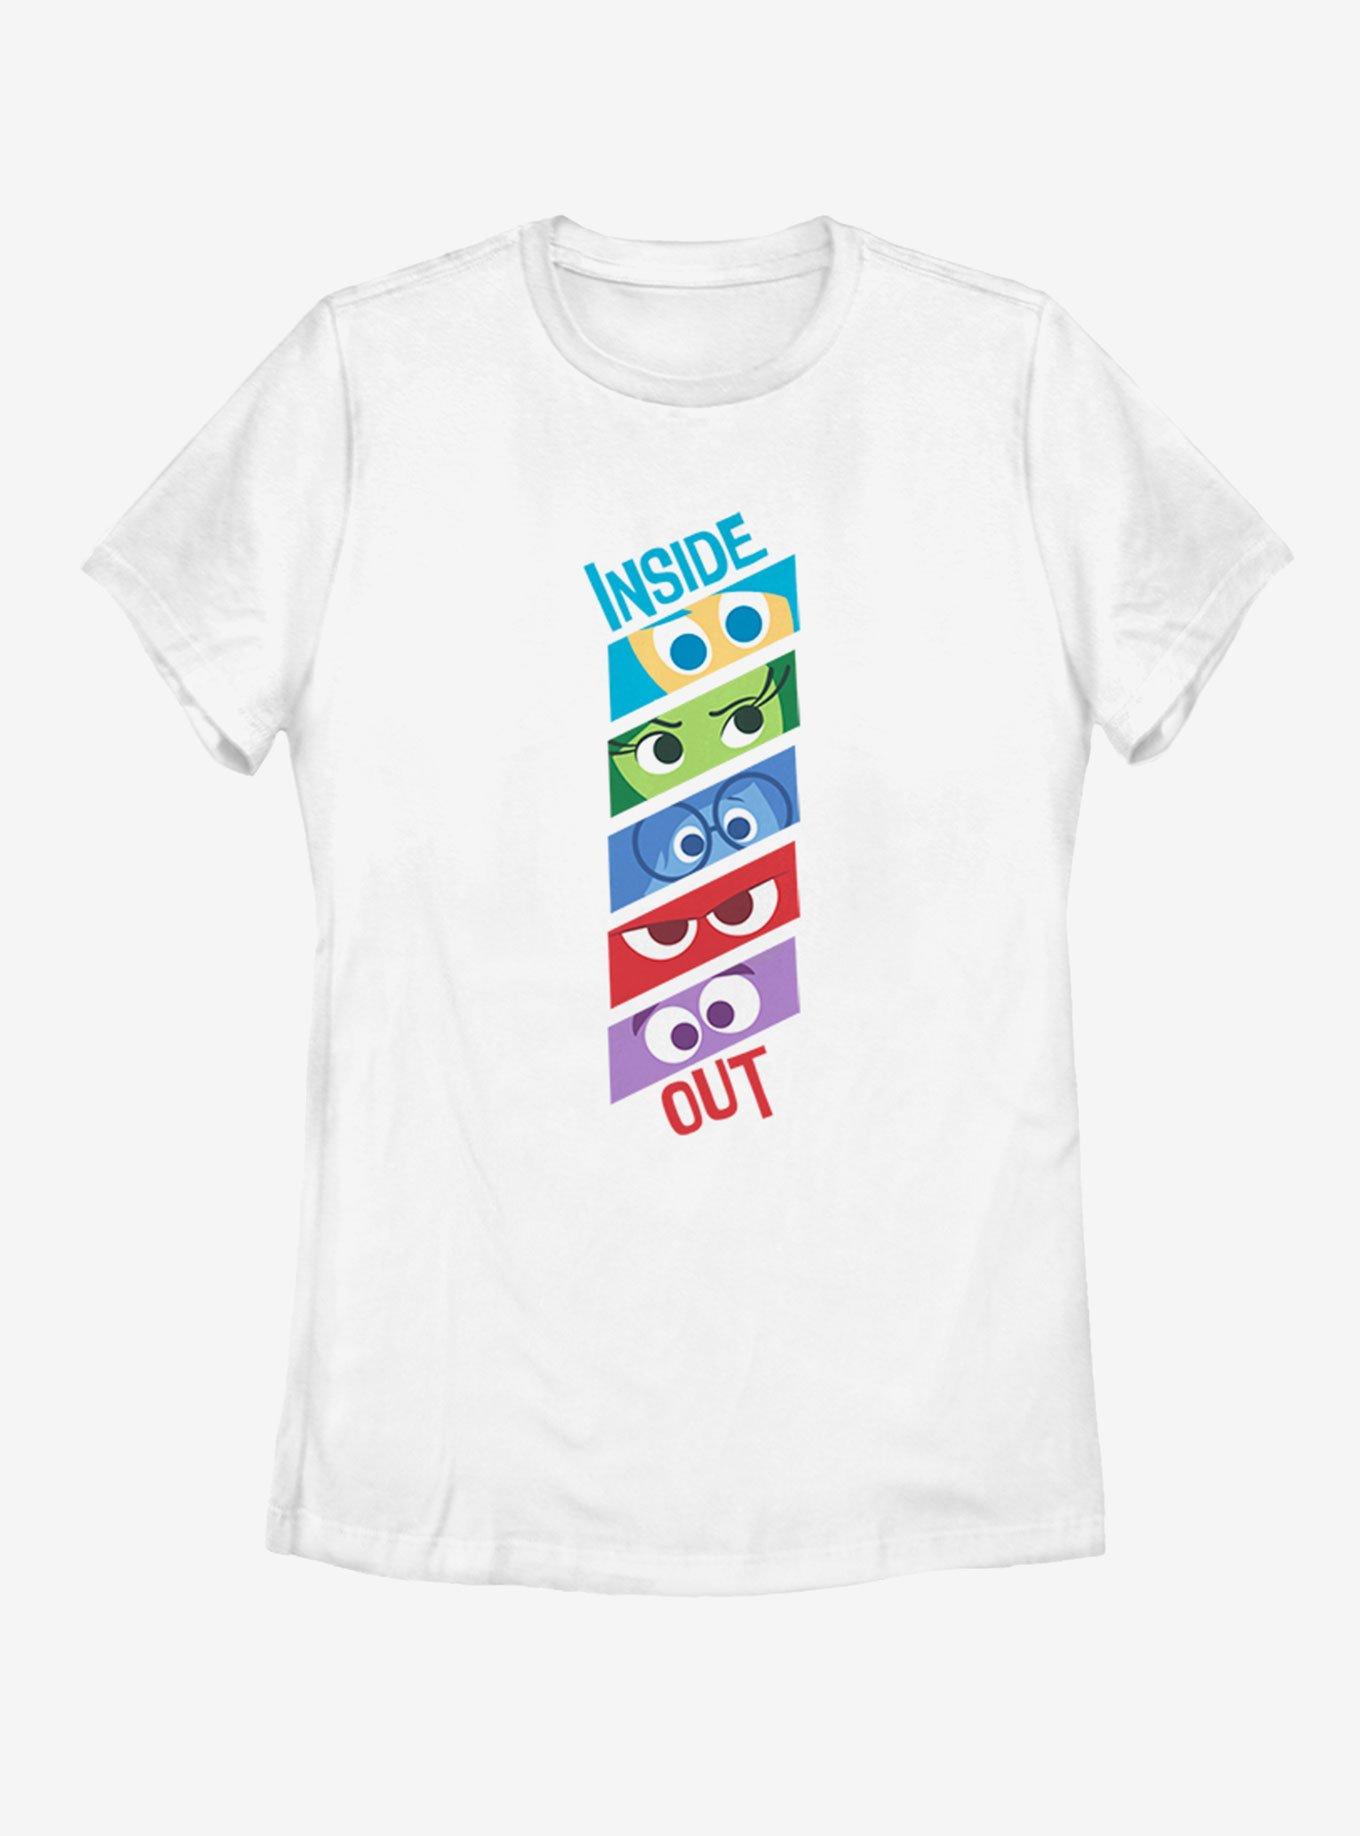 Inside Out T-shirt in white